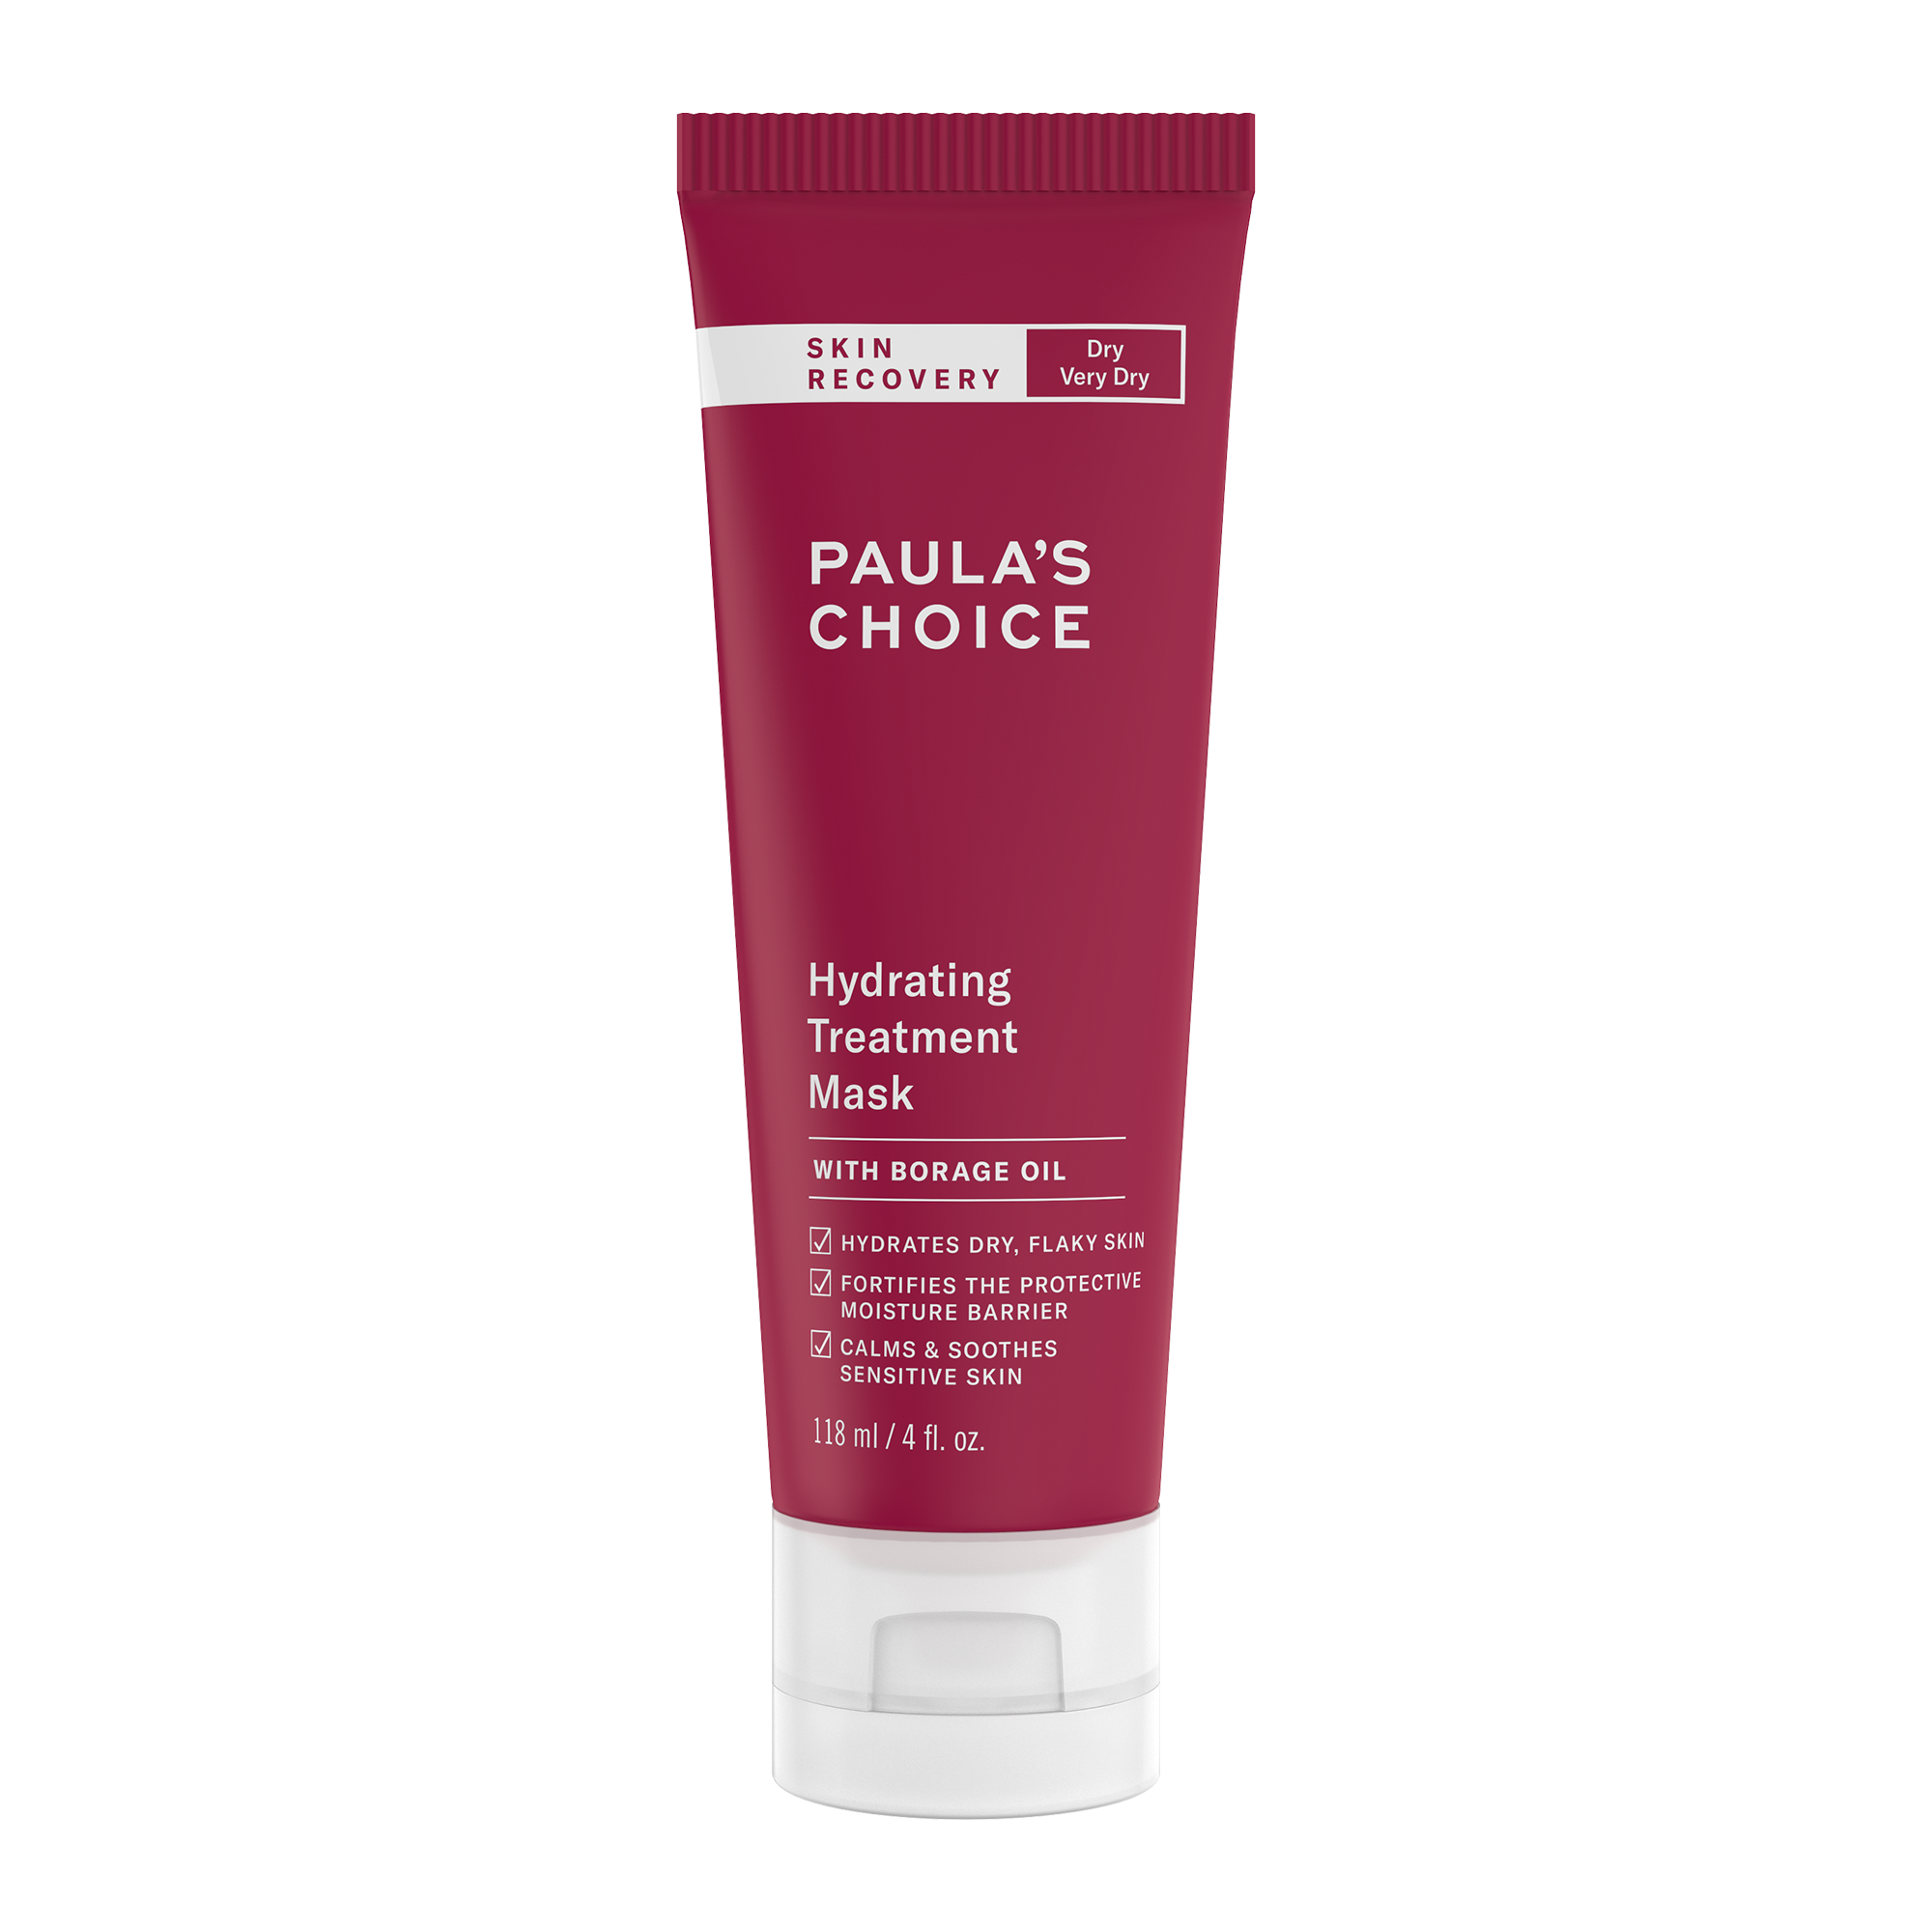 schroef Grillig Verduisteren SKIN RECOVERY Hydrating Treatment Mask | Paula's Choice